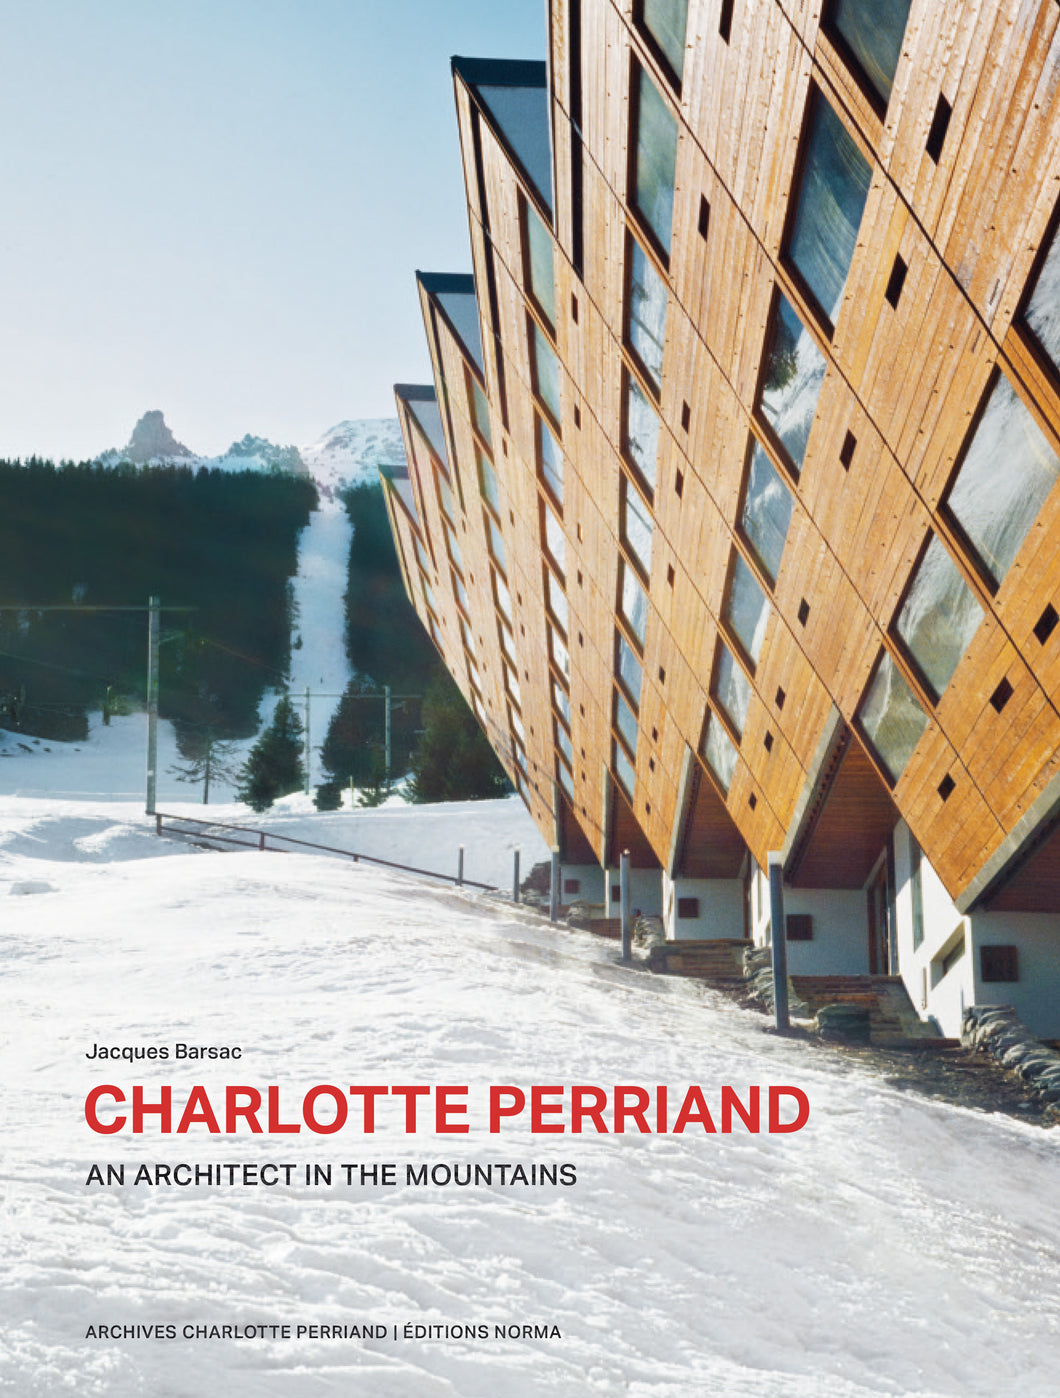 CHARLOTTE PERRIAND, An architect in the mountains